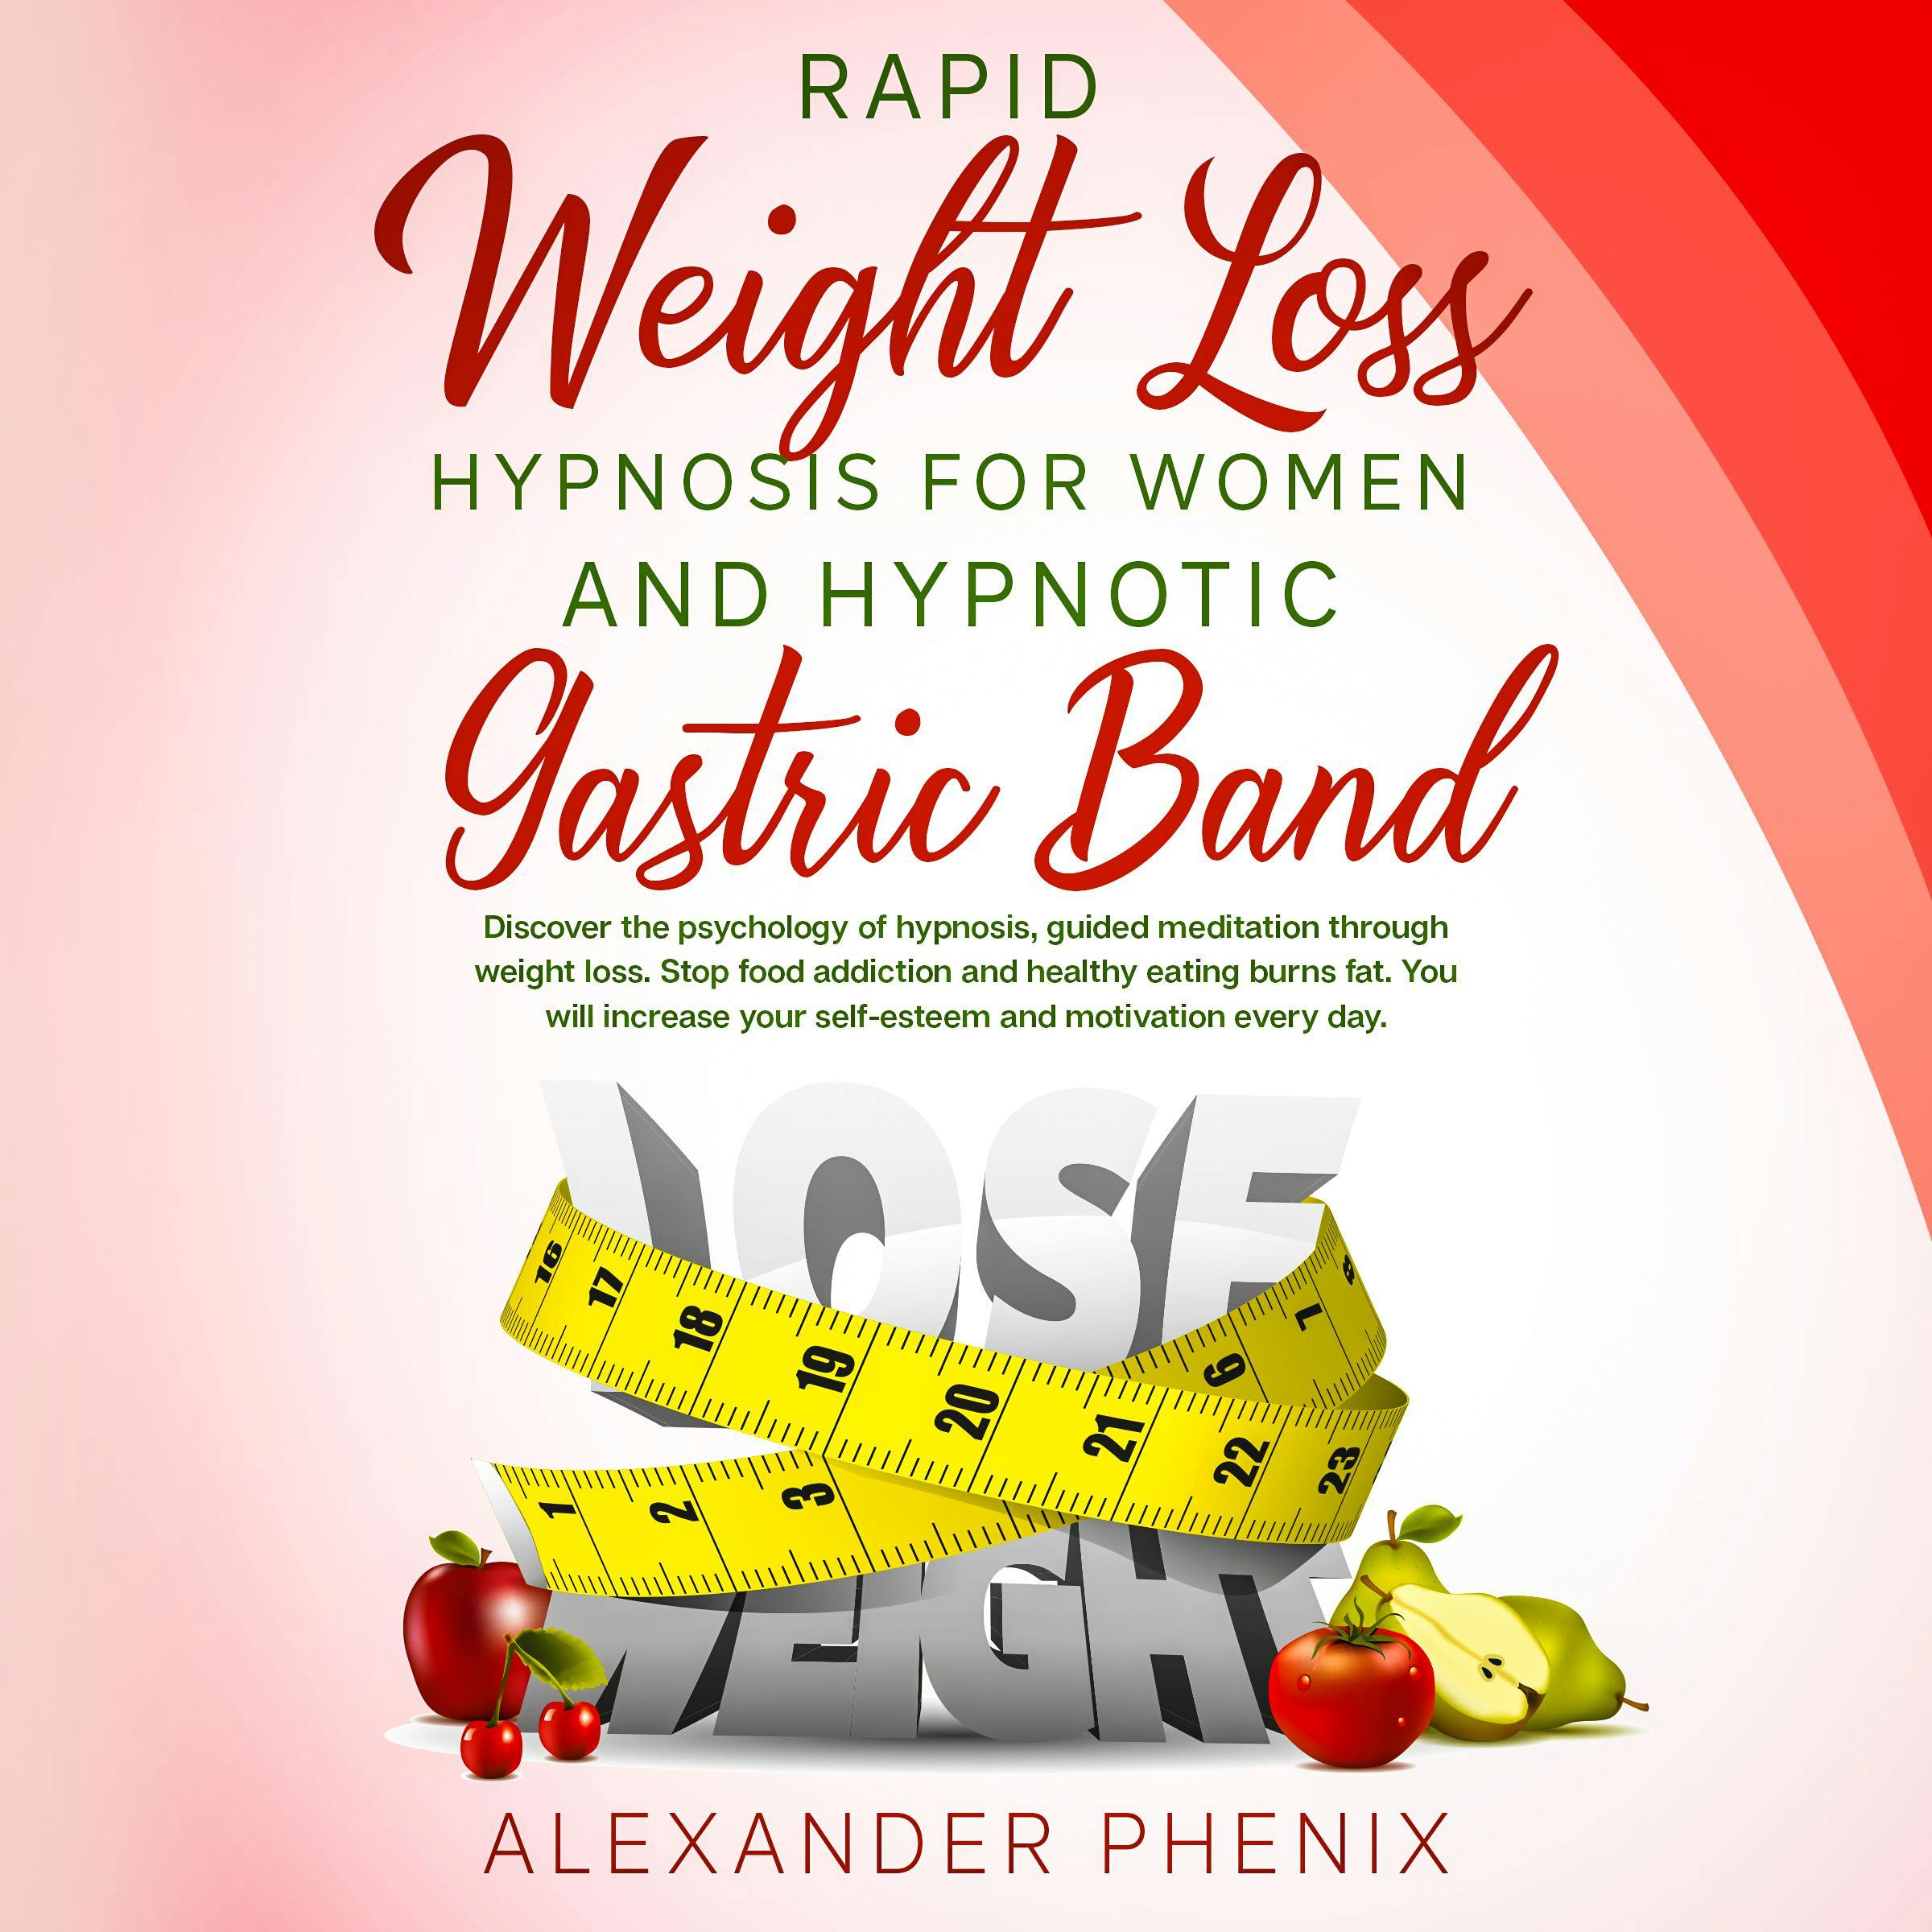 Rapid Weight Loss Hypnosis for Women and Hypnotic Gastric Band: Discover the psychology of hypnosis, guided meditation through weight loss. Stop food addiction and healthy eating burns fat - Alexander Phenix